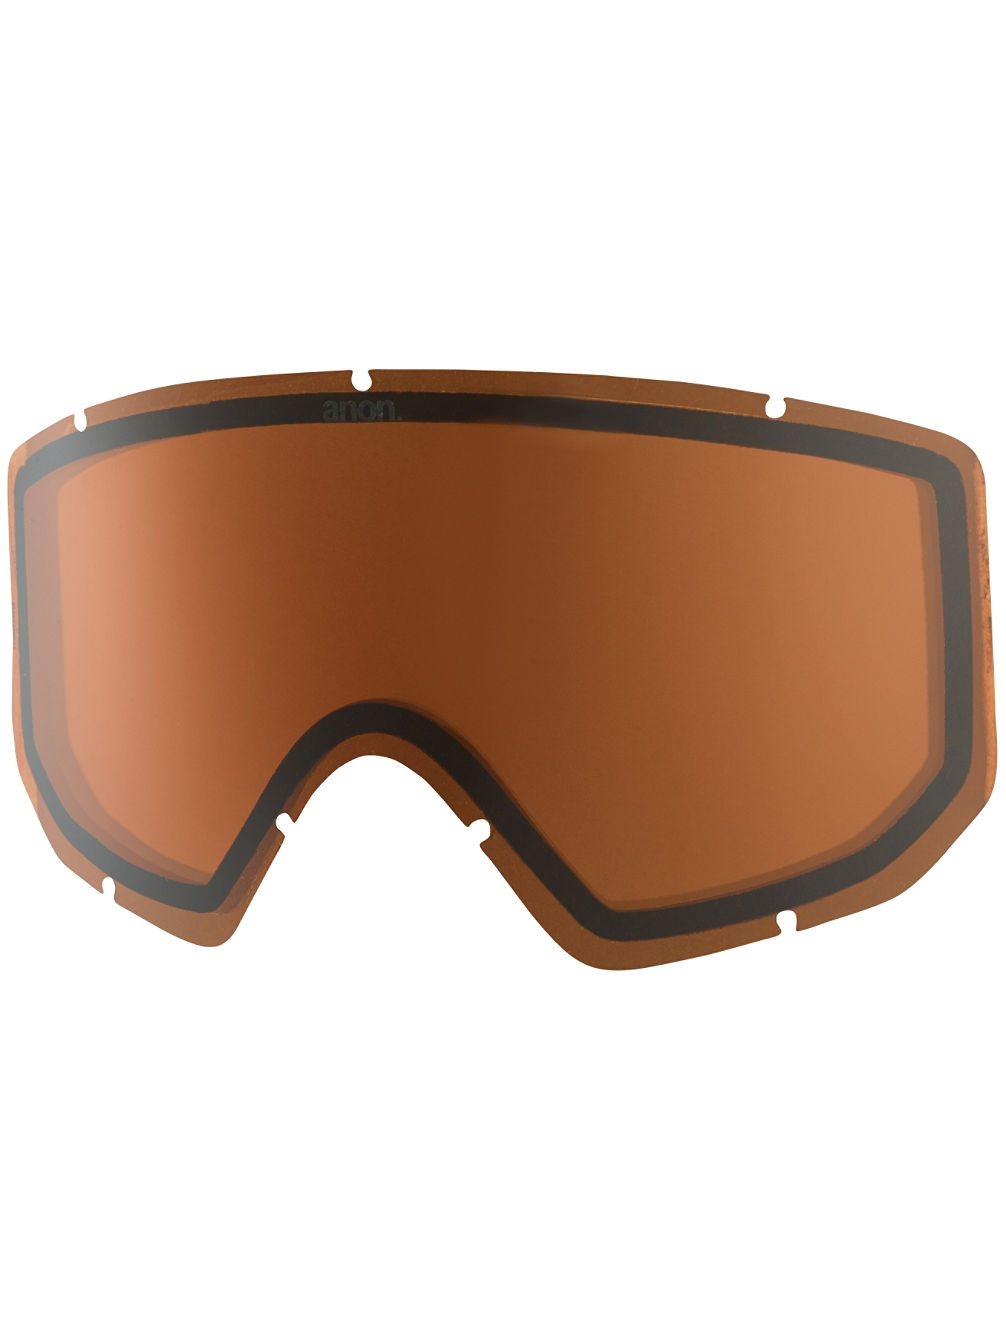 Relapse Jr Lense Youth Goggle